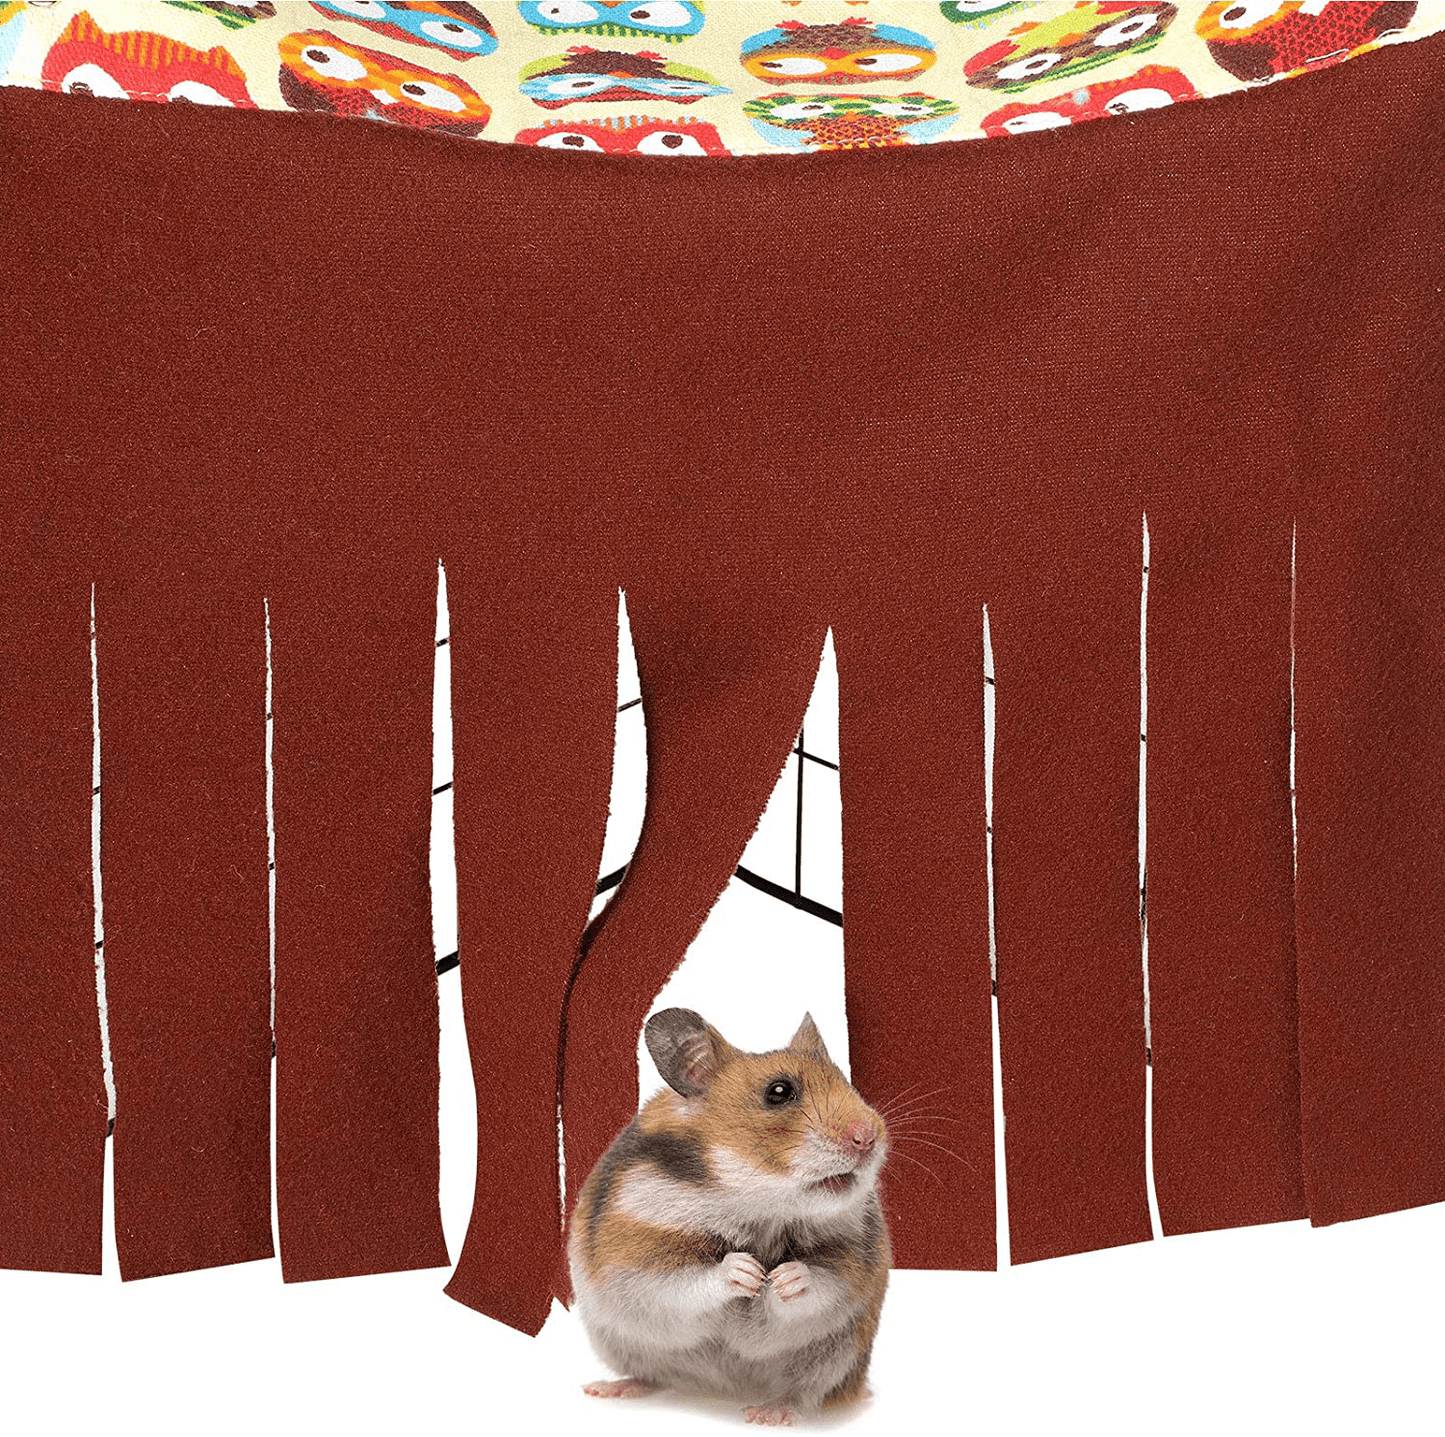 2 Pieces Corner Hideout for Guinea Pigs Forest Hideaway Peekaboo Pet Cage Accessories Funny Habitat Tent Hammock with 3 Hooks and Curtain Sides for Small Animals Hamster Ferret Mice Chinchilla